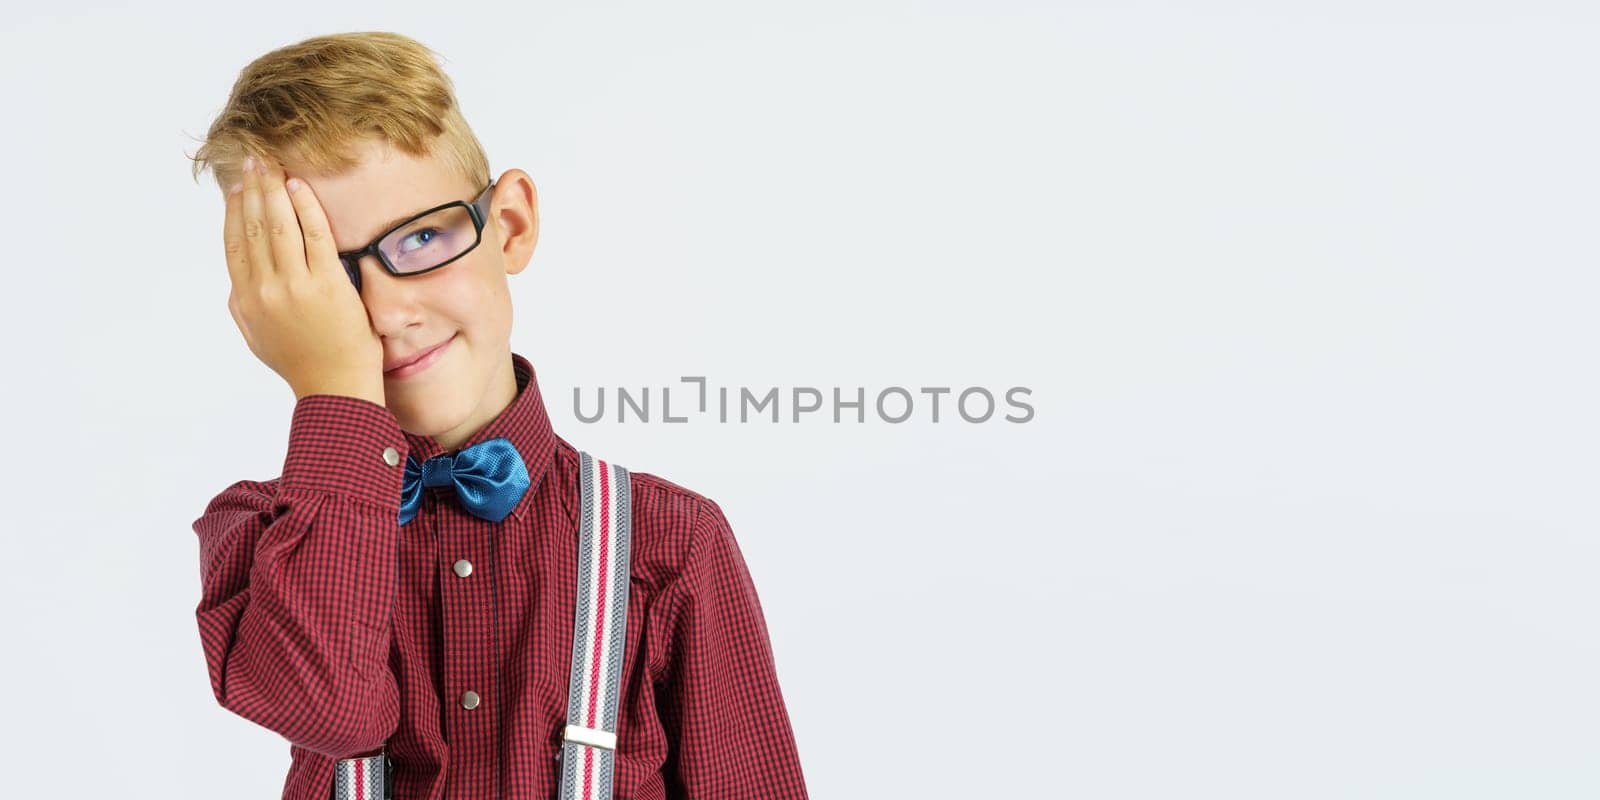 Portrait of a schoolboy who covered one eye with his hand. Isolated background. Education concept.